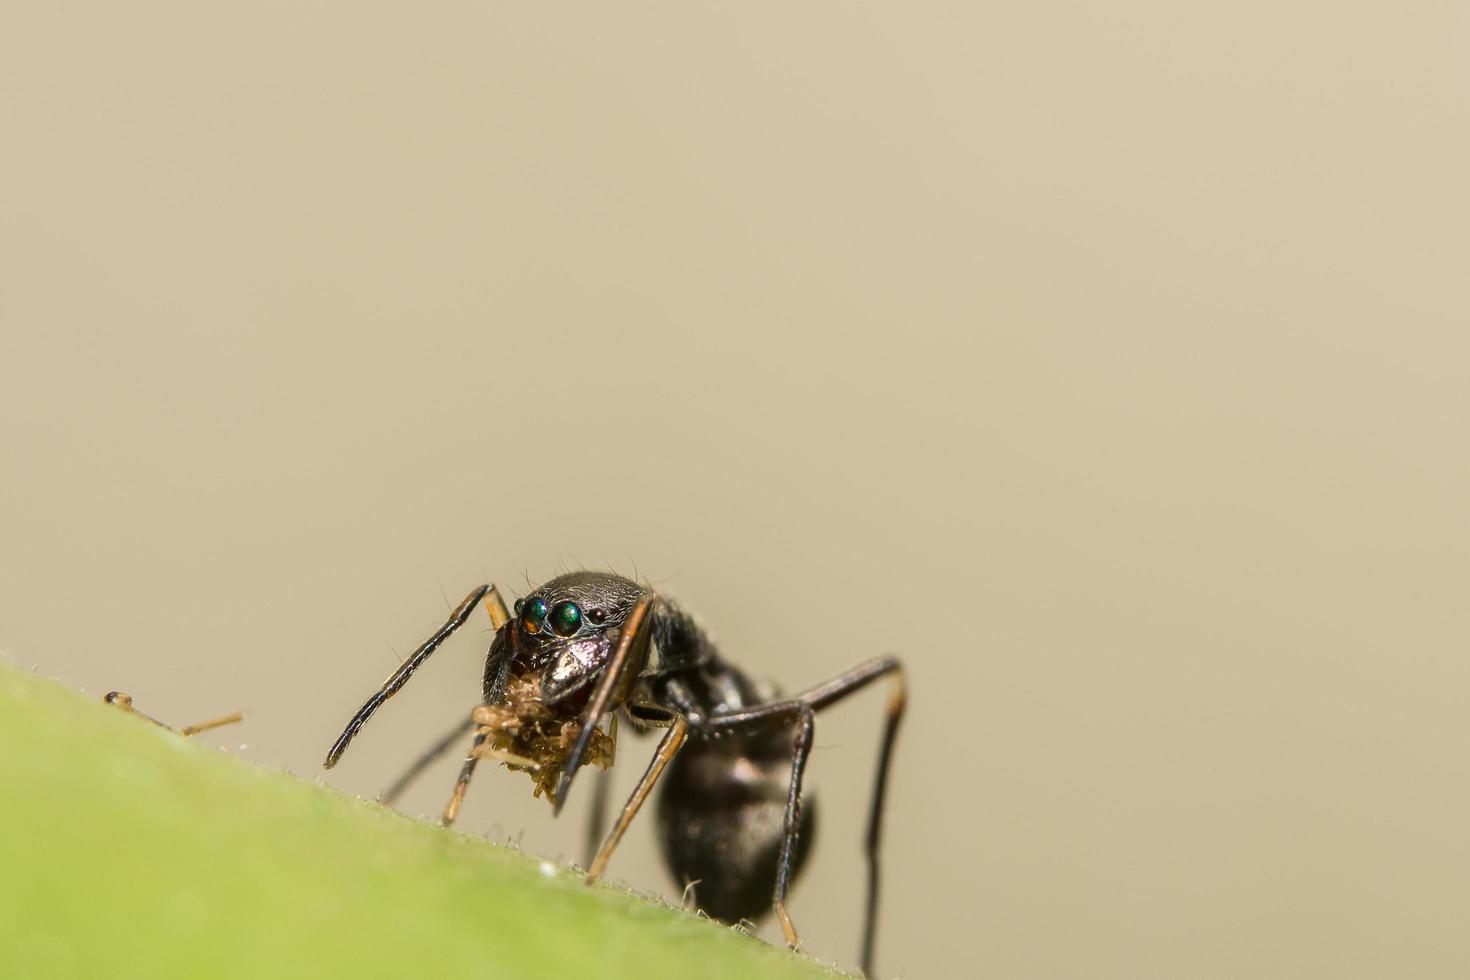 Giant ant-like jumping spider close-up photo